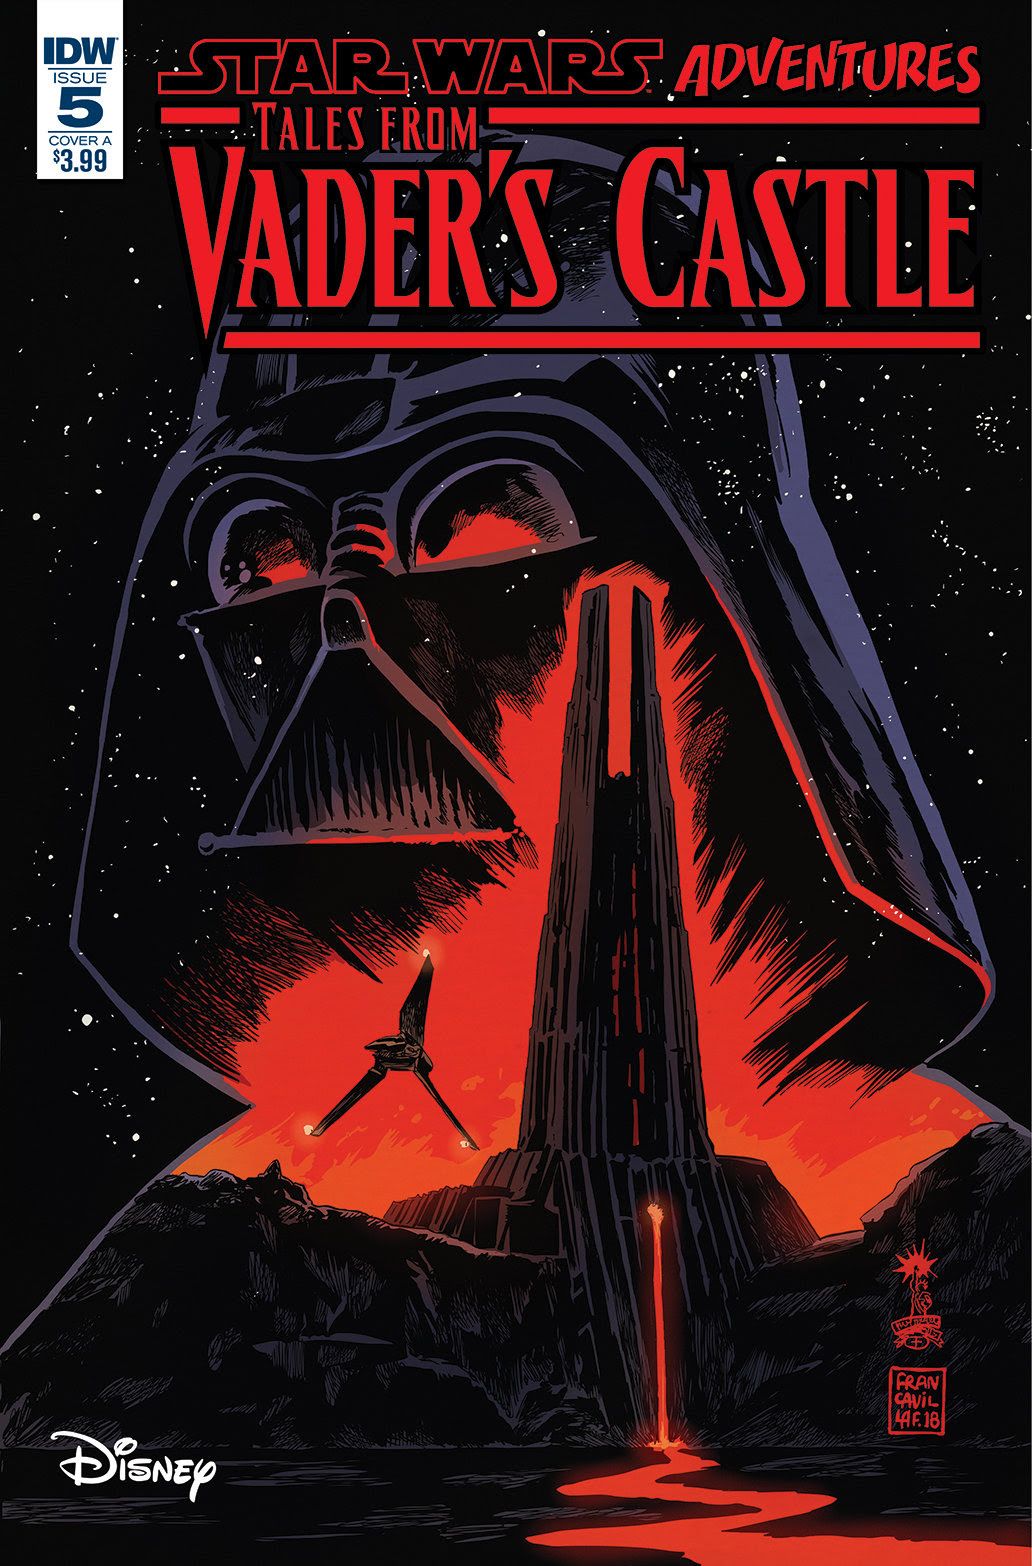 Star Wars Adventures Tales From Vader's Castle Cover #5